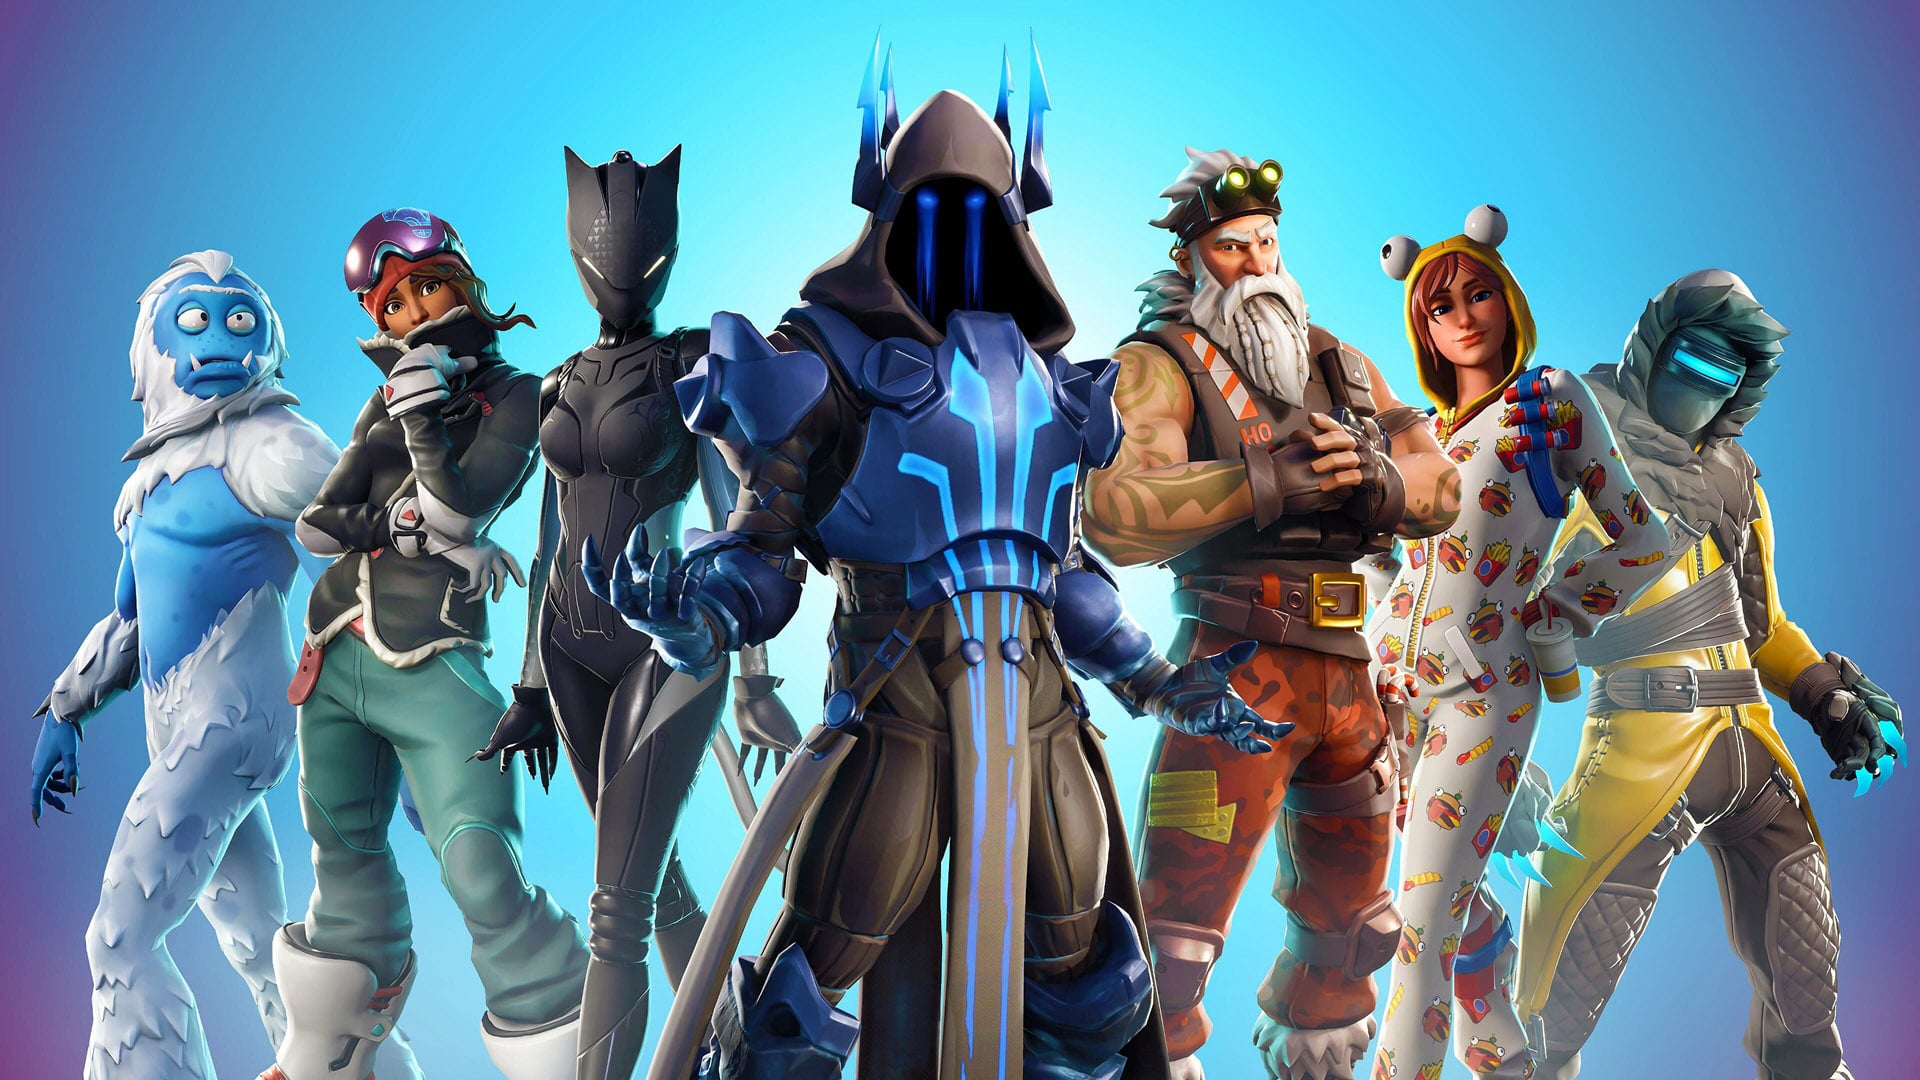 Fortnite game action featuring characters in vibrant outfits on a dynamic battlefield